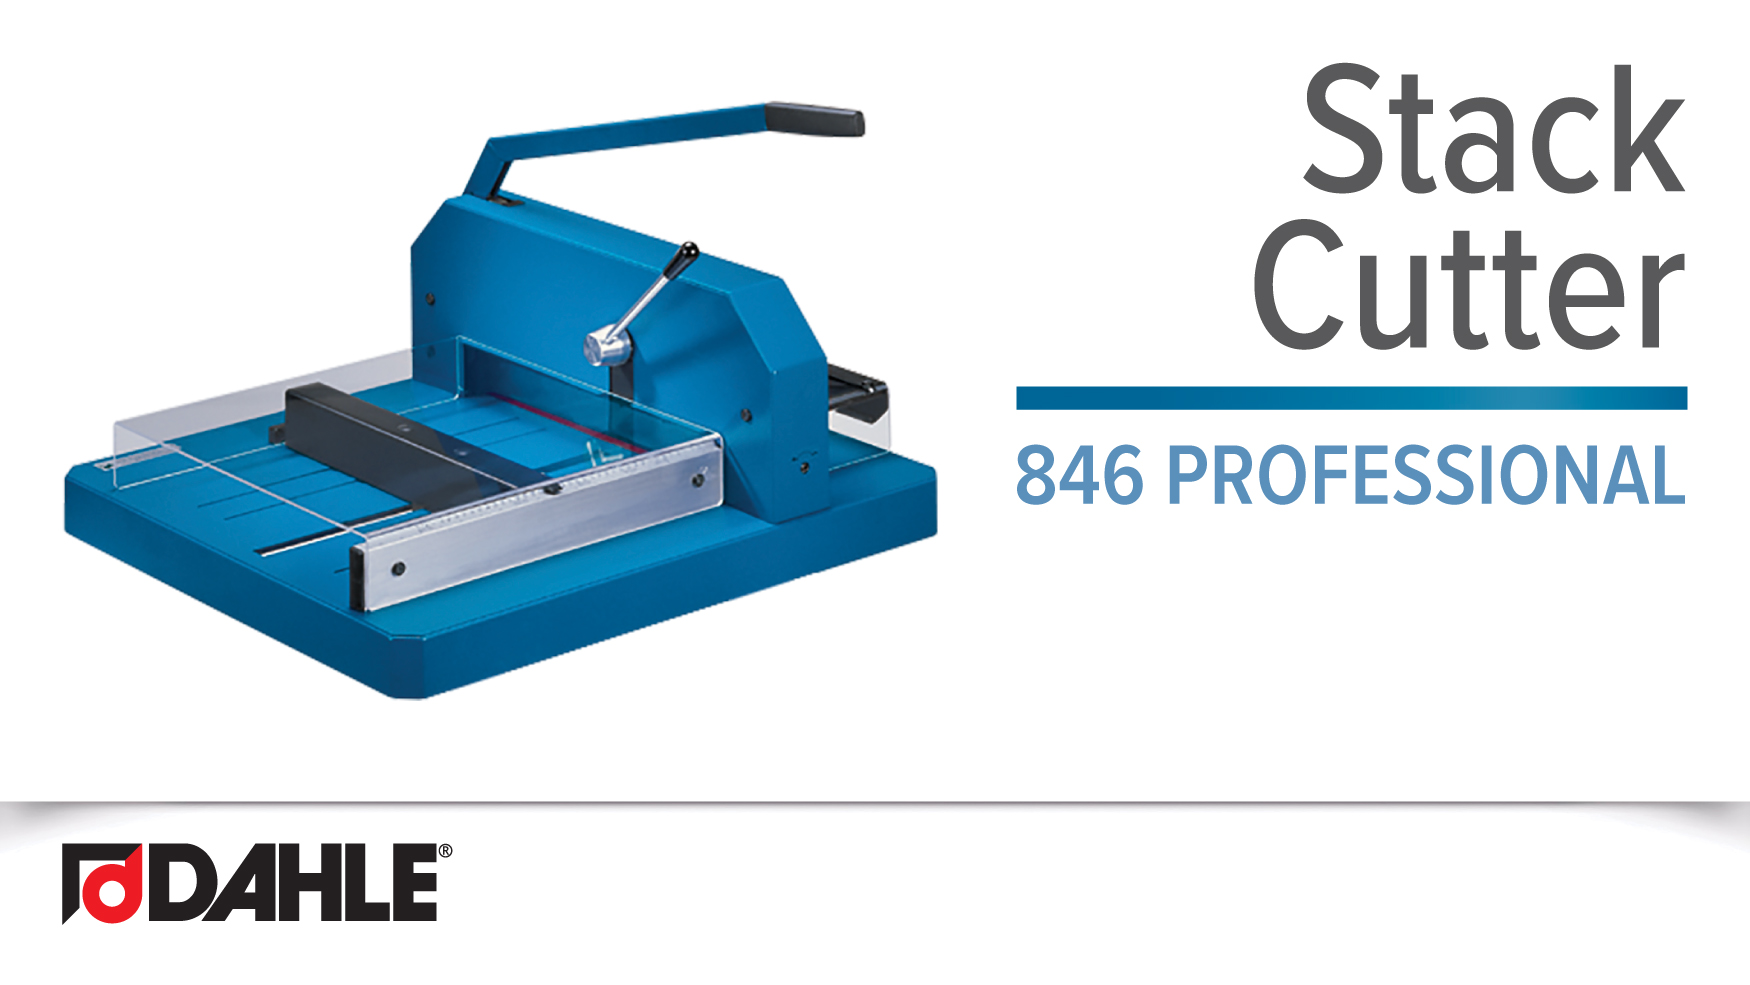 <big><strong>Dahle Stack Cutters</strong></big><br>Professional Series